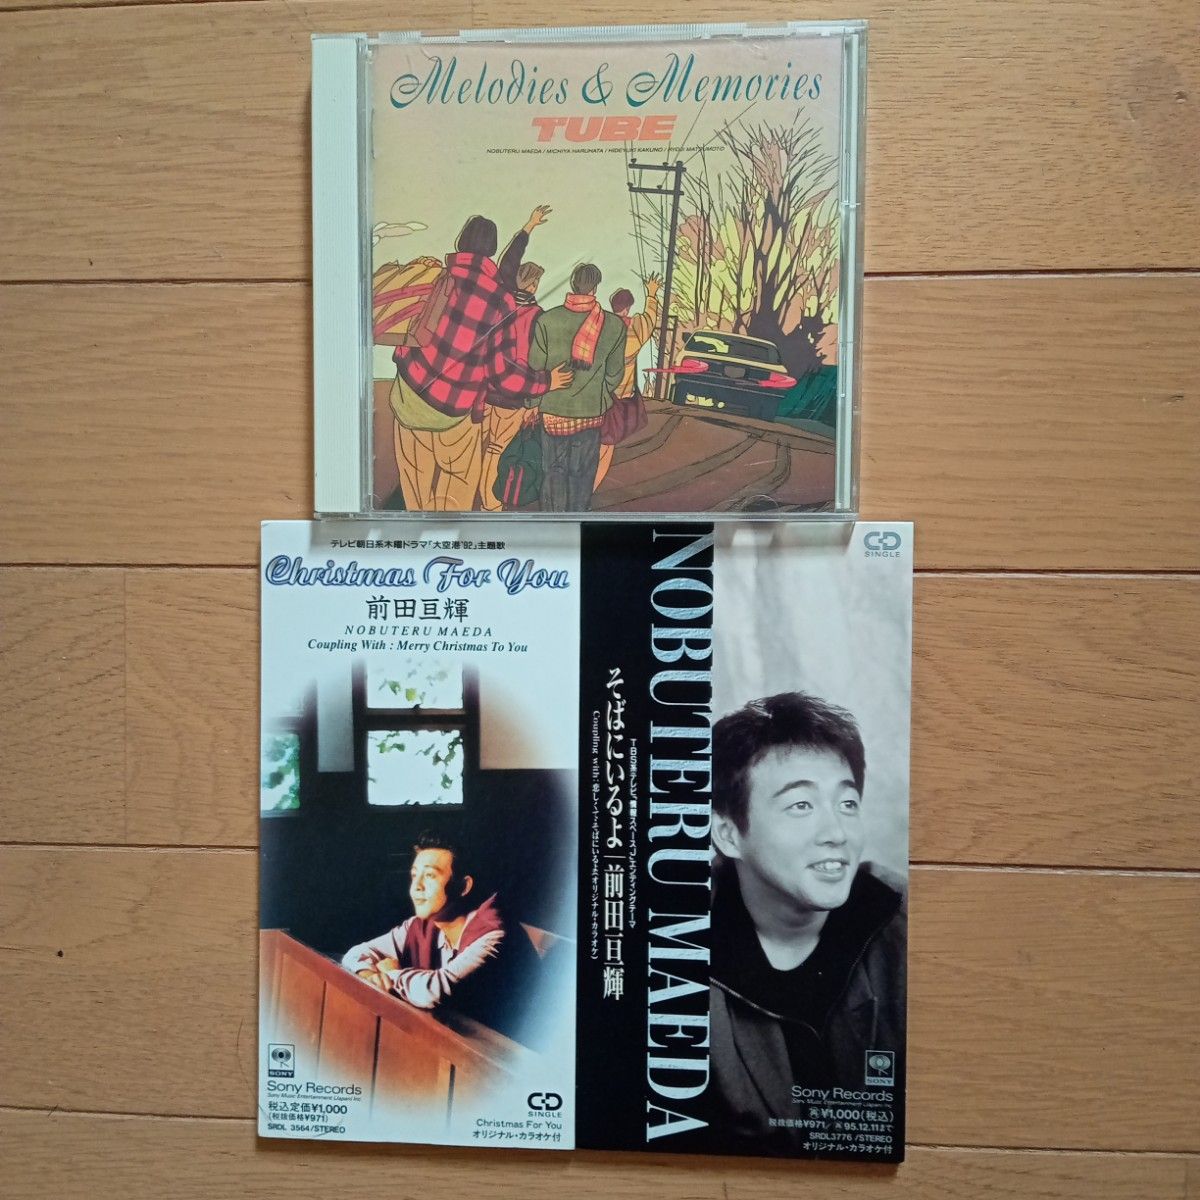 Melodies & Memories/TUBE、そばにいるよ/前田亘輝、Cristmas For You/前田亘輝　CD